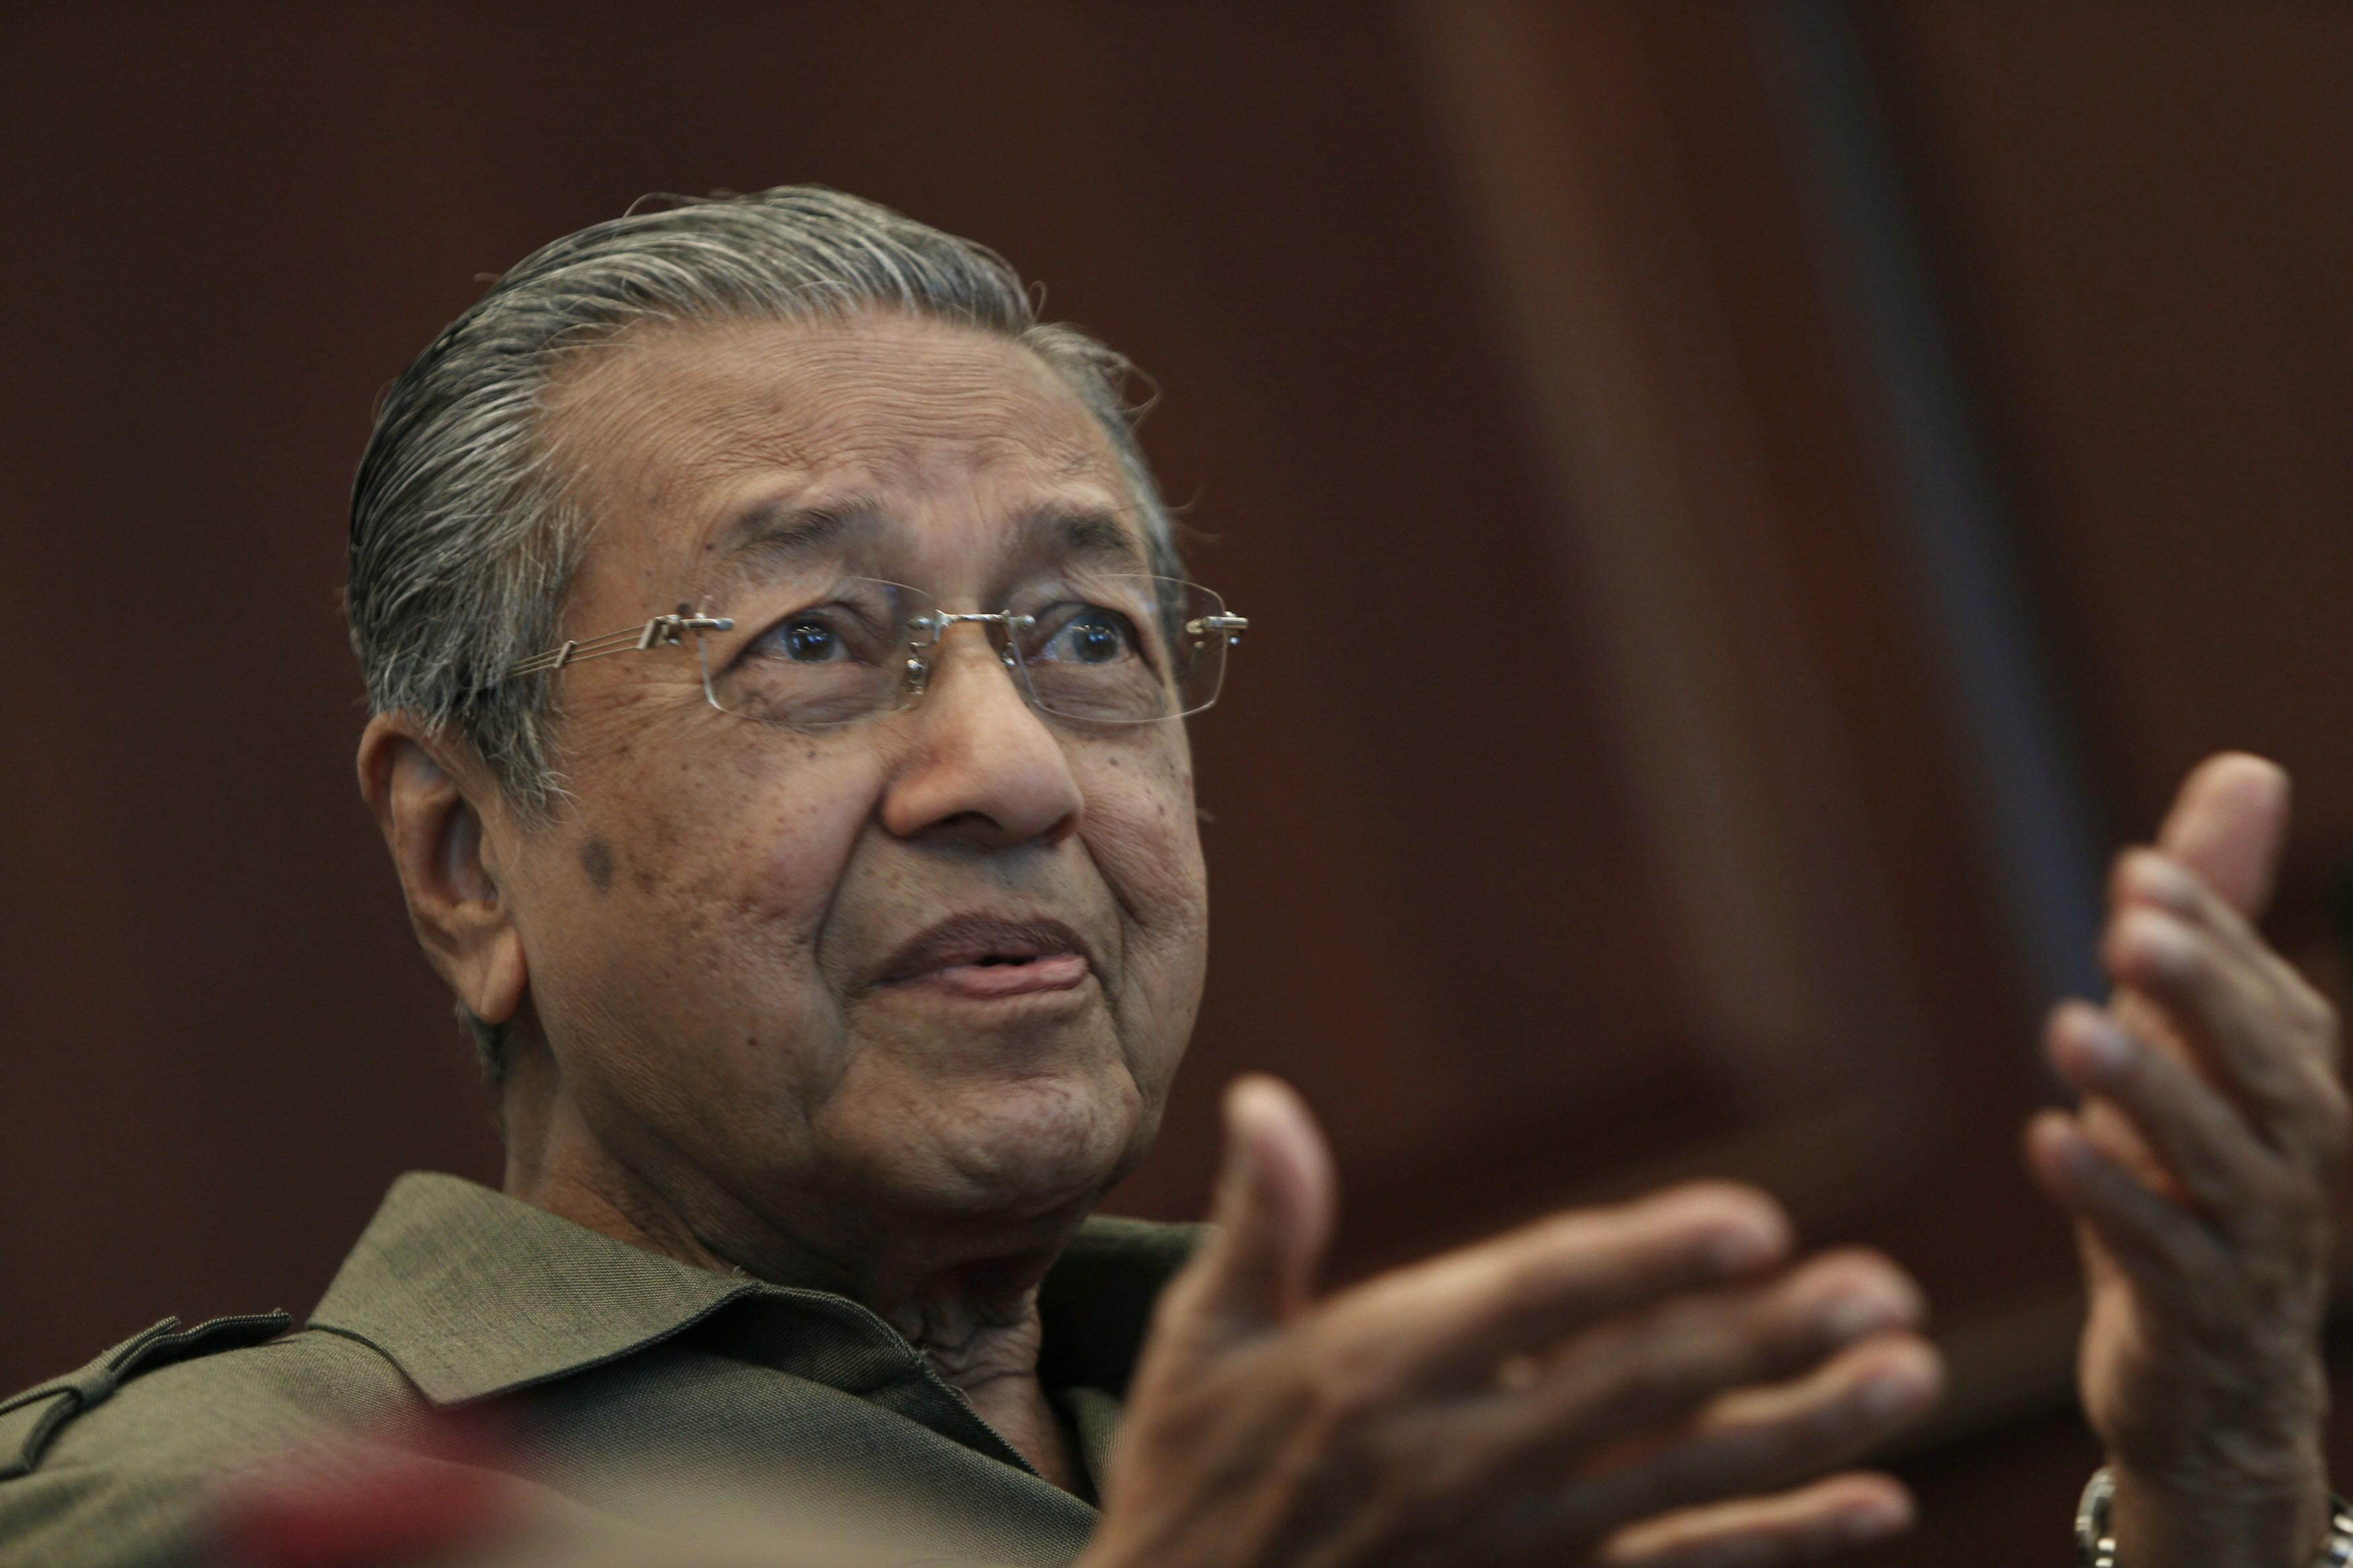 Mahathir quizzed as political tensions rise in Malaysia